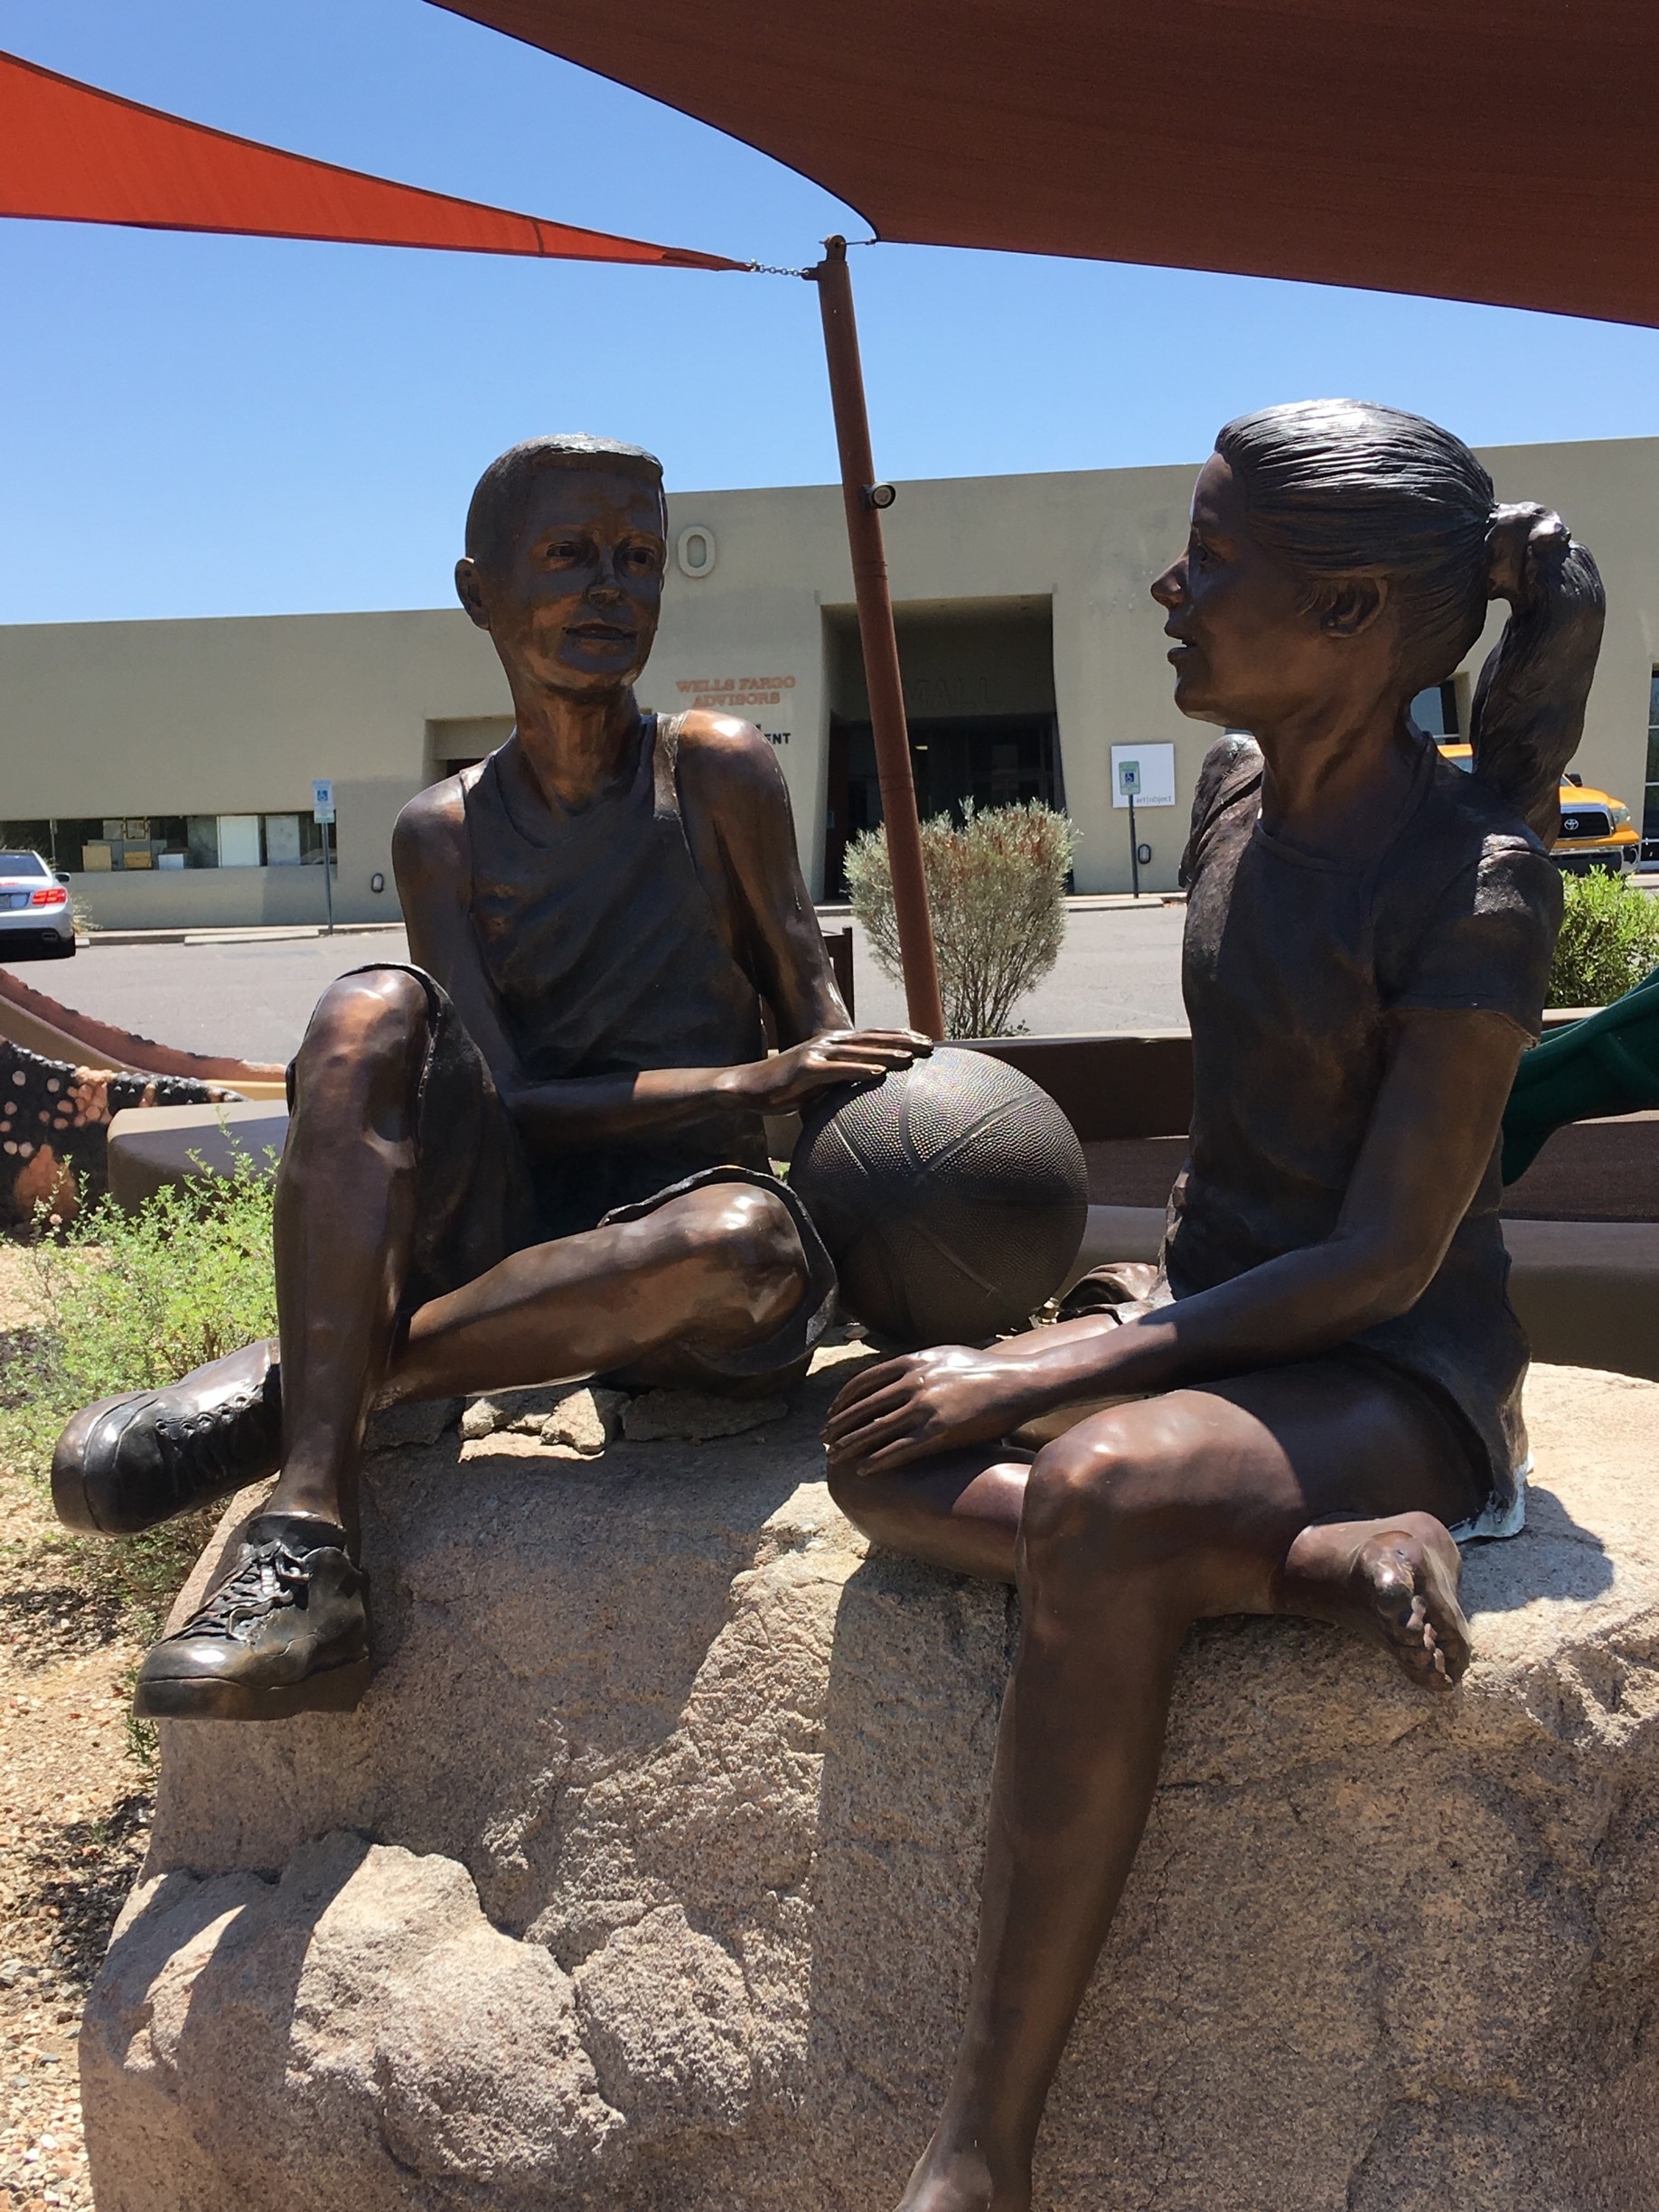 Near the Carefree sundial is a children’s play area and these bronze statues of kids taking a time out
#likeALocal